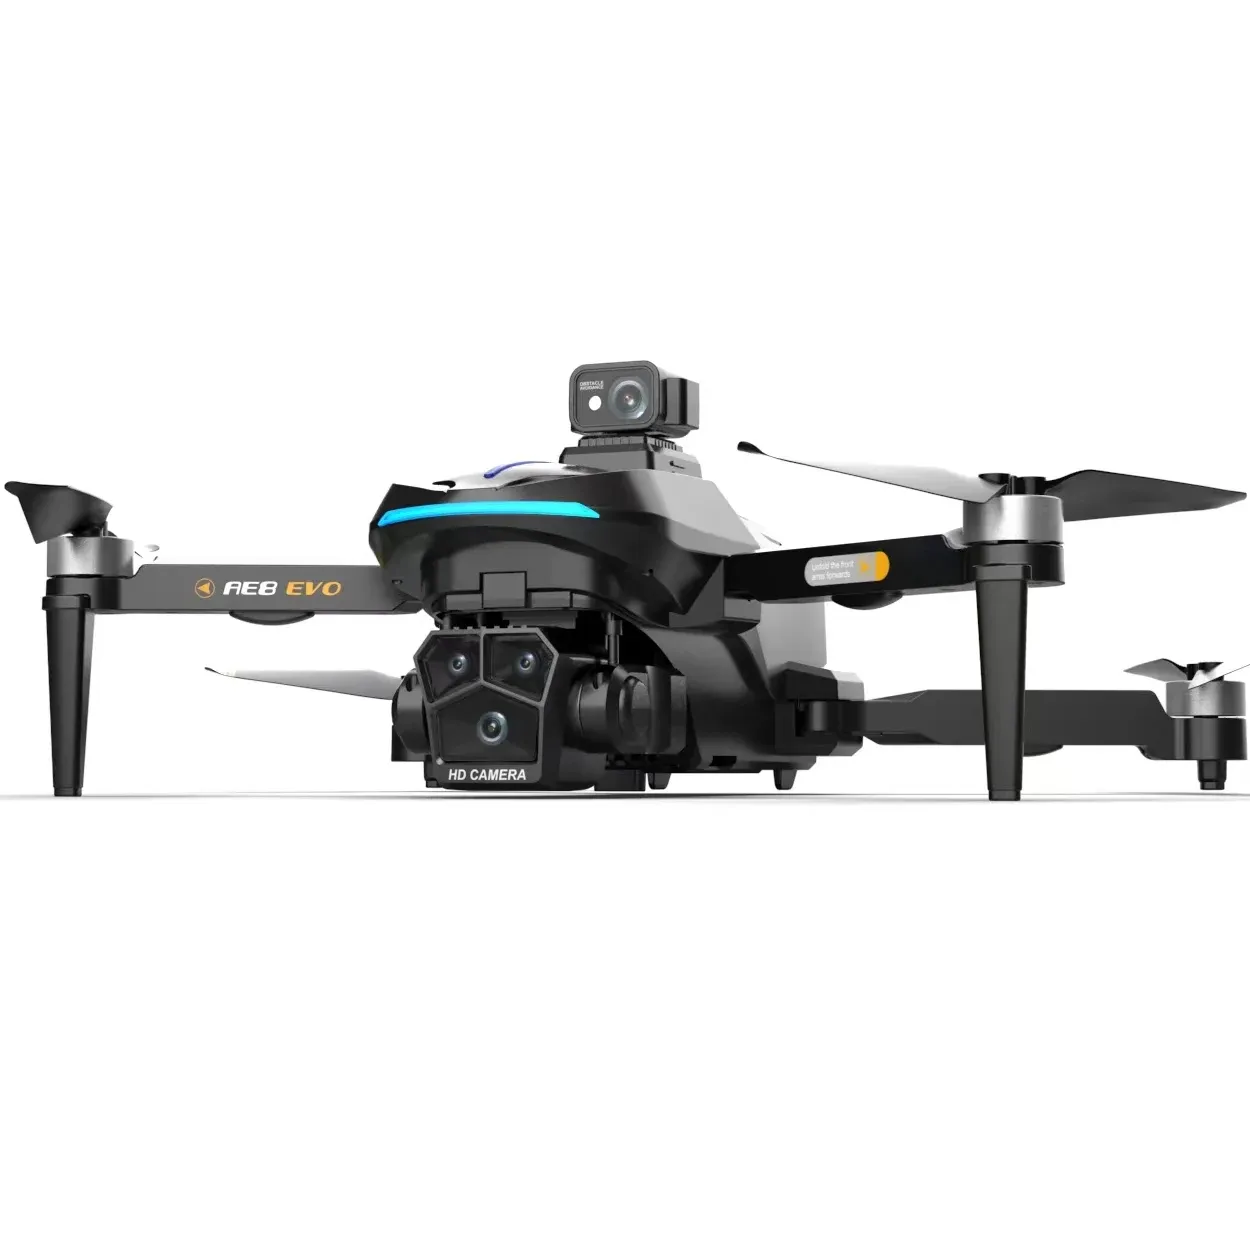 AE8 EVO 5G HD Image Transmission Brushless Motor 90 Degree Servo Camera RC GPS Drone with Obstacle Avoidance